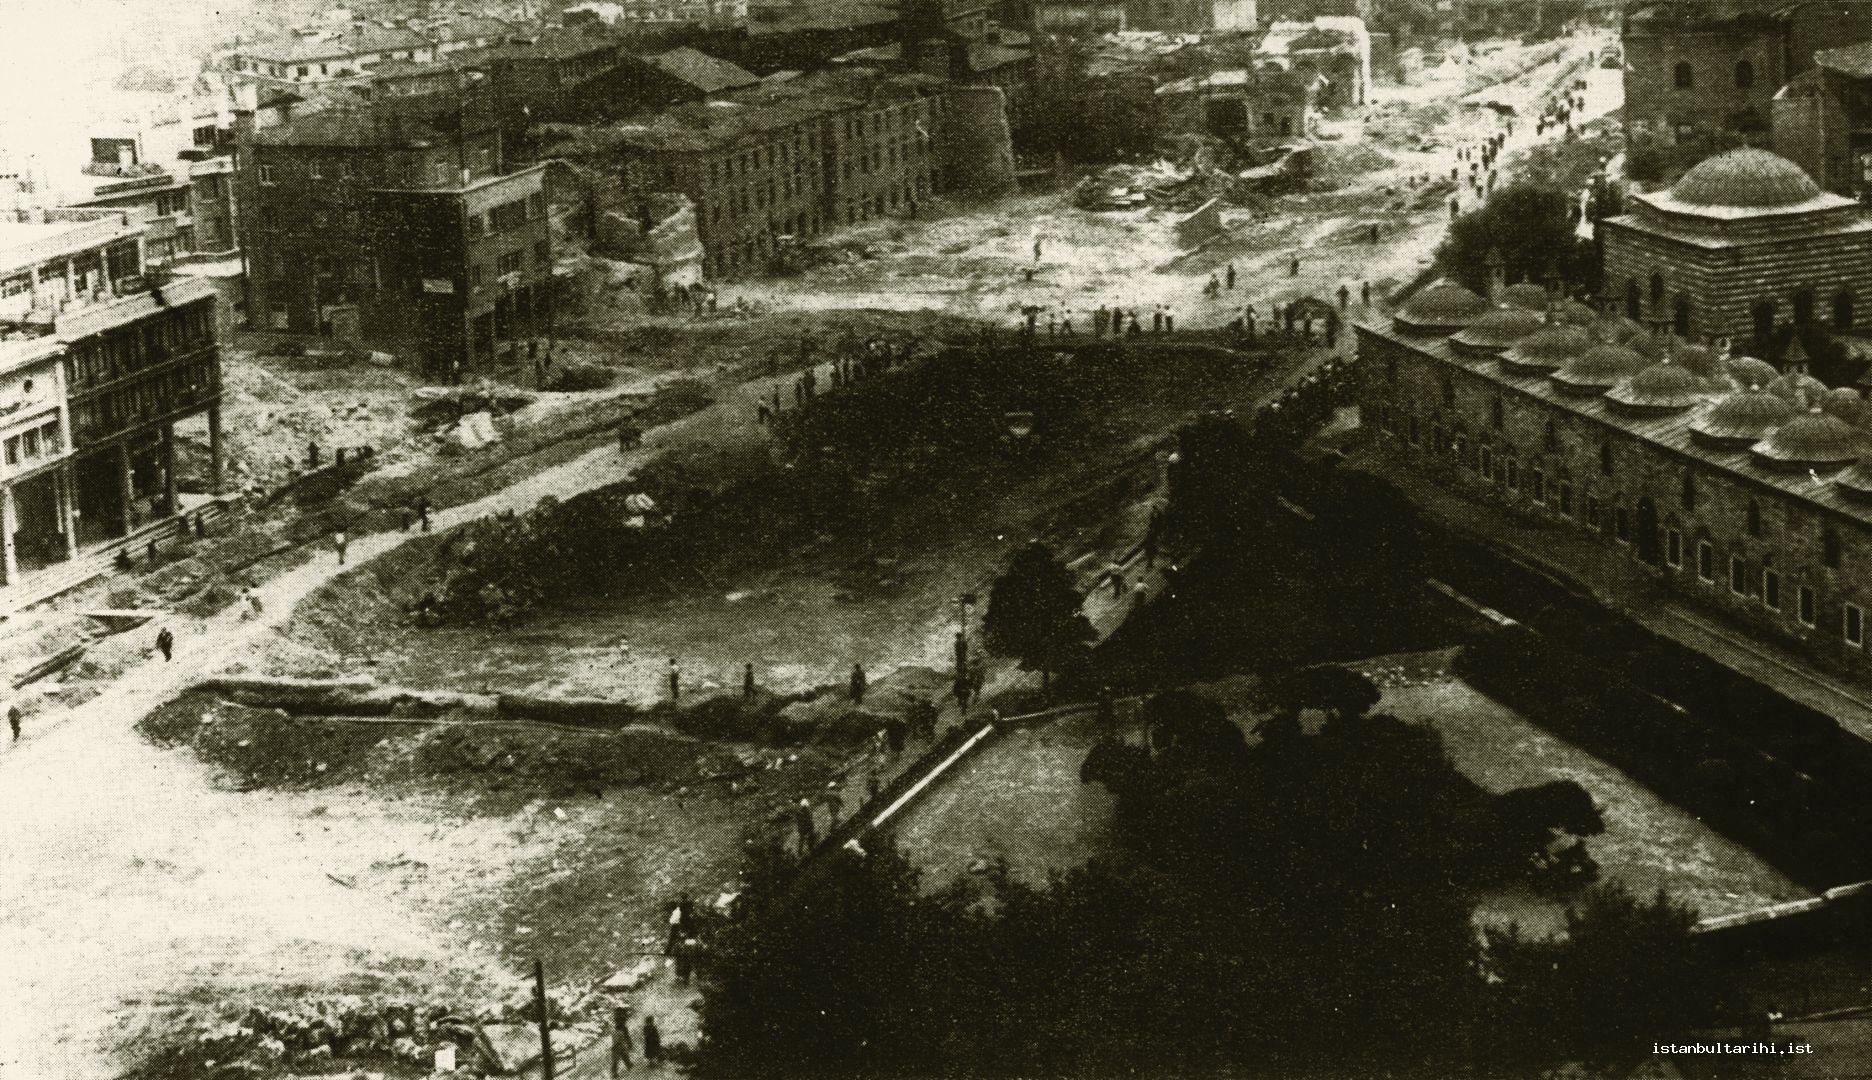 13- Ordu Avenue was broadened by destroying some building which deemed necessary to be destroyed and its levelling and blockage were completed. In a very short time, it was going to be covered with 25 cm concrete and then asphalted. (<em>İstanbul’un Kitabı</em>)